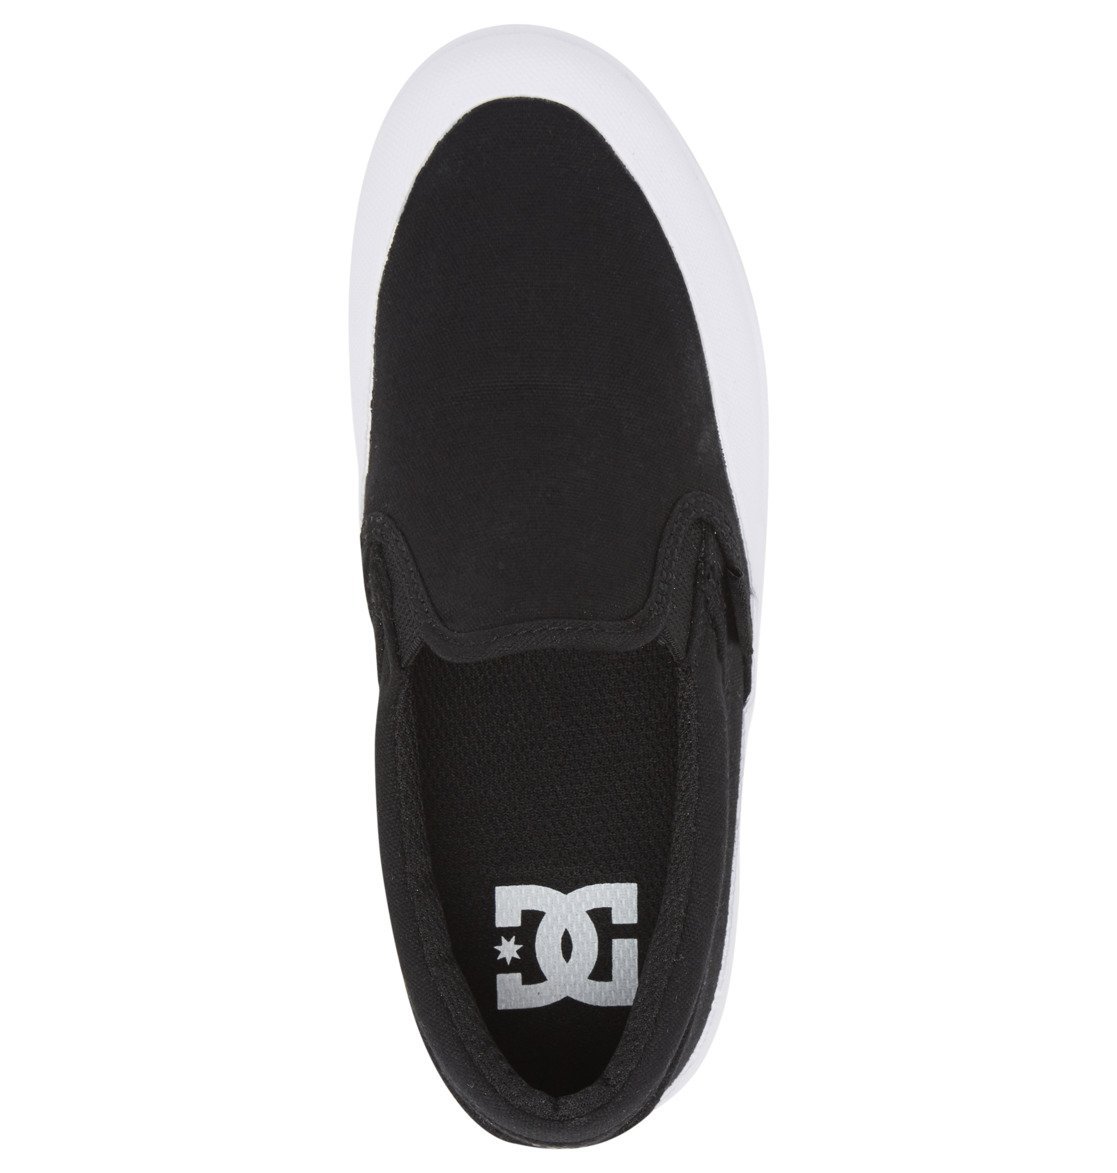 DC Infinite Slip On Shoes Youth Black/White FOOTWEAR - Youth and Toddler Skate Shoes DC 